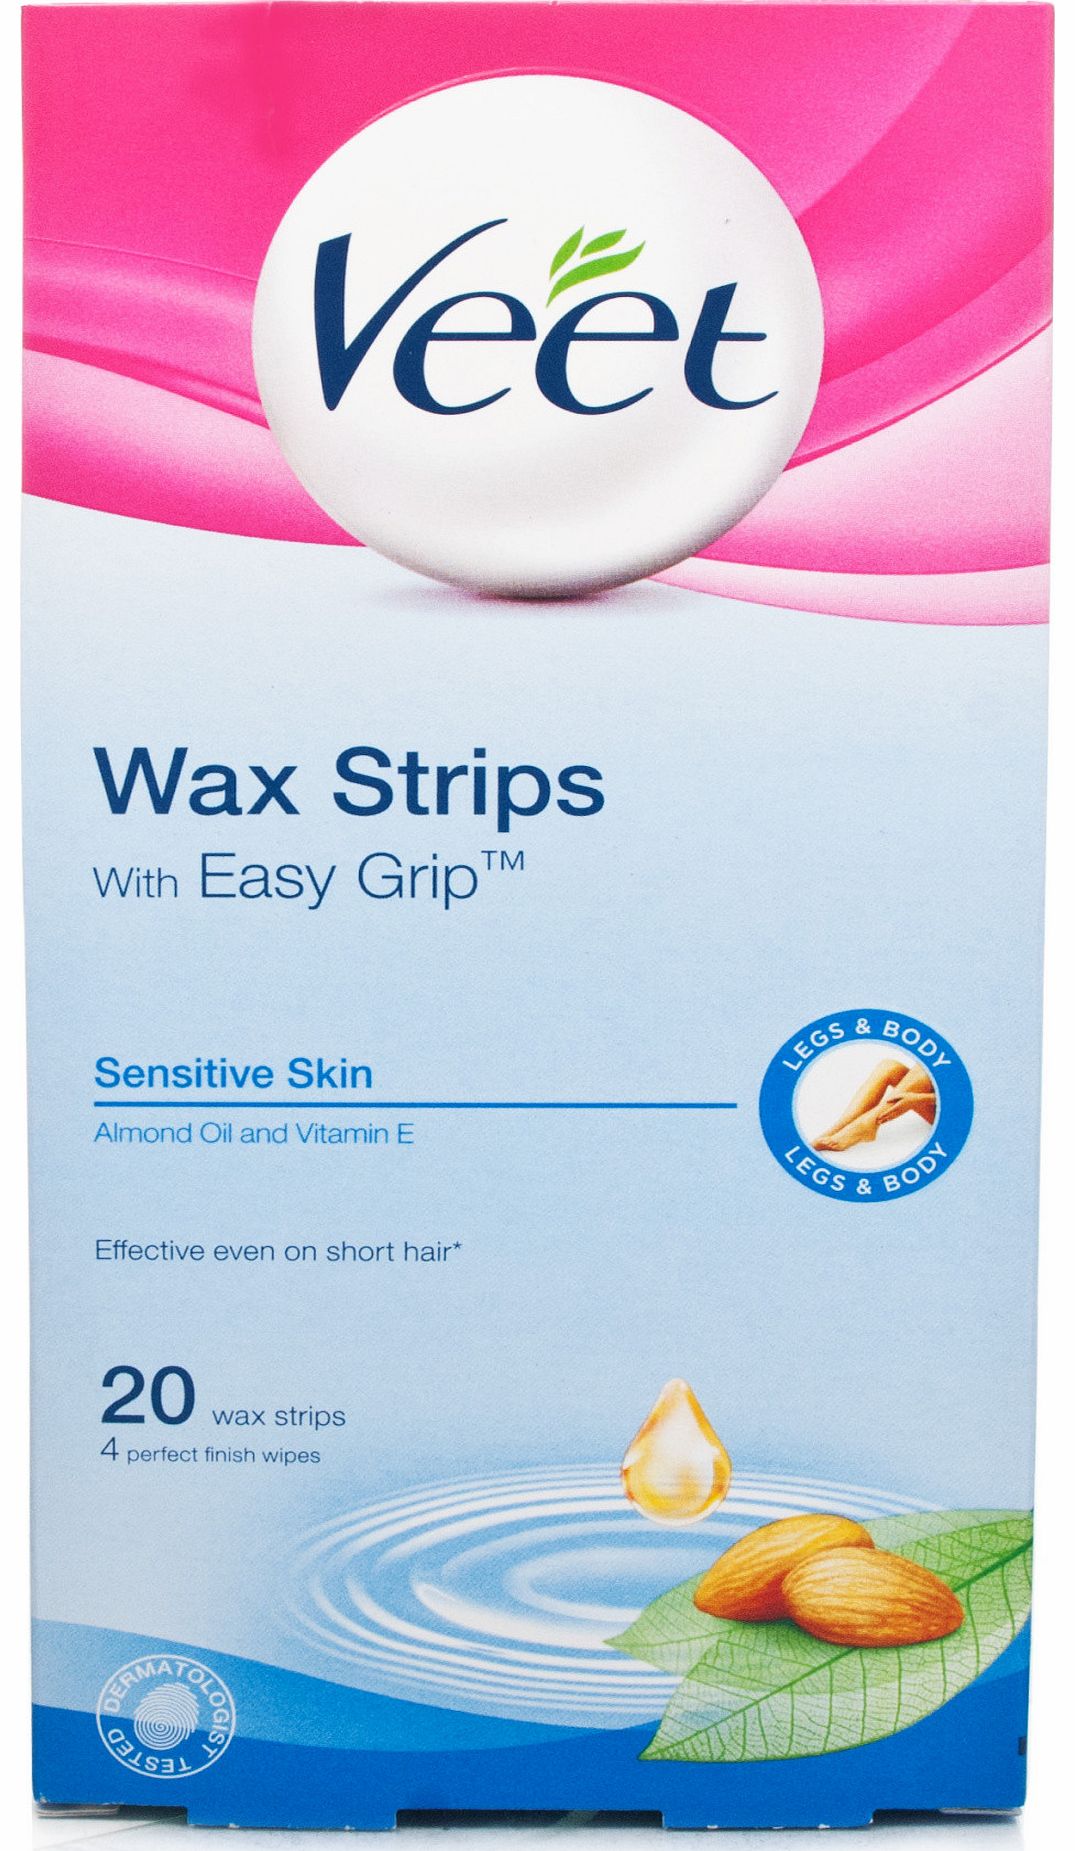 Veet Ready To Use Wax Strips for Sensitive Skin